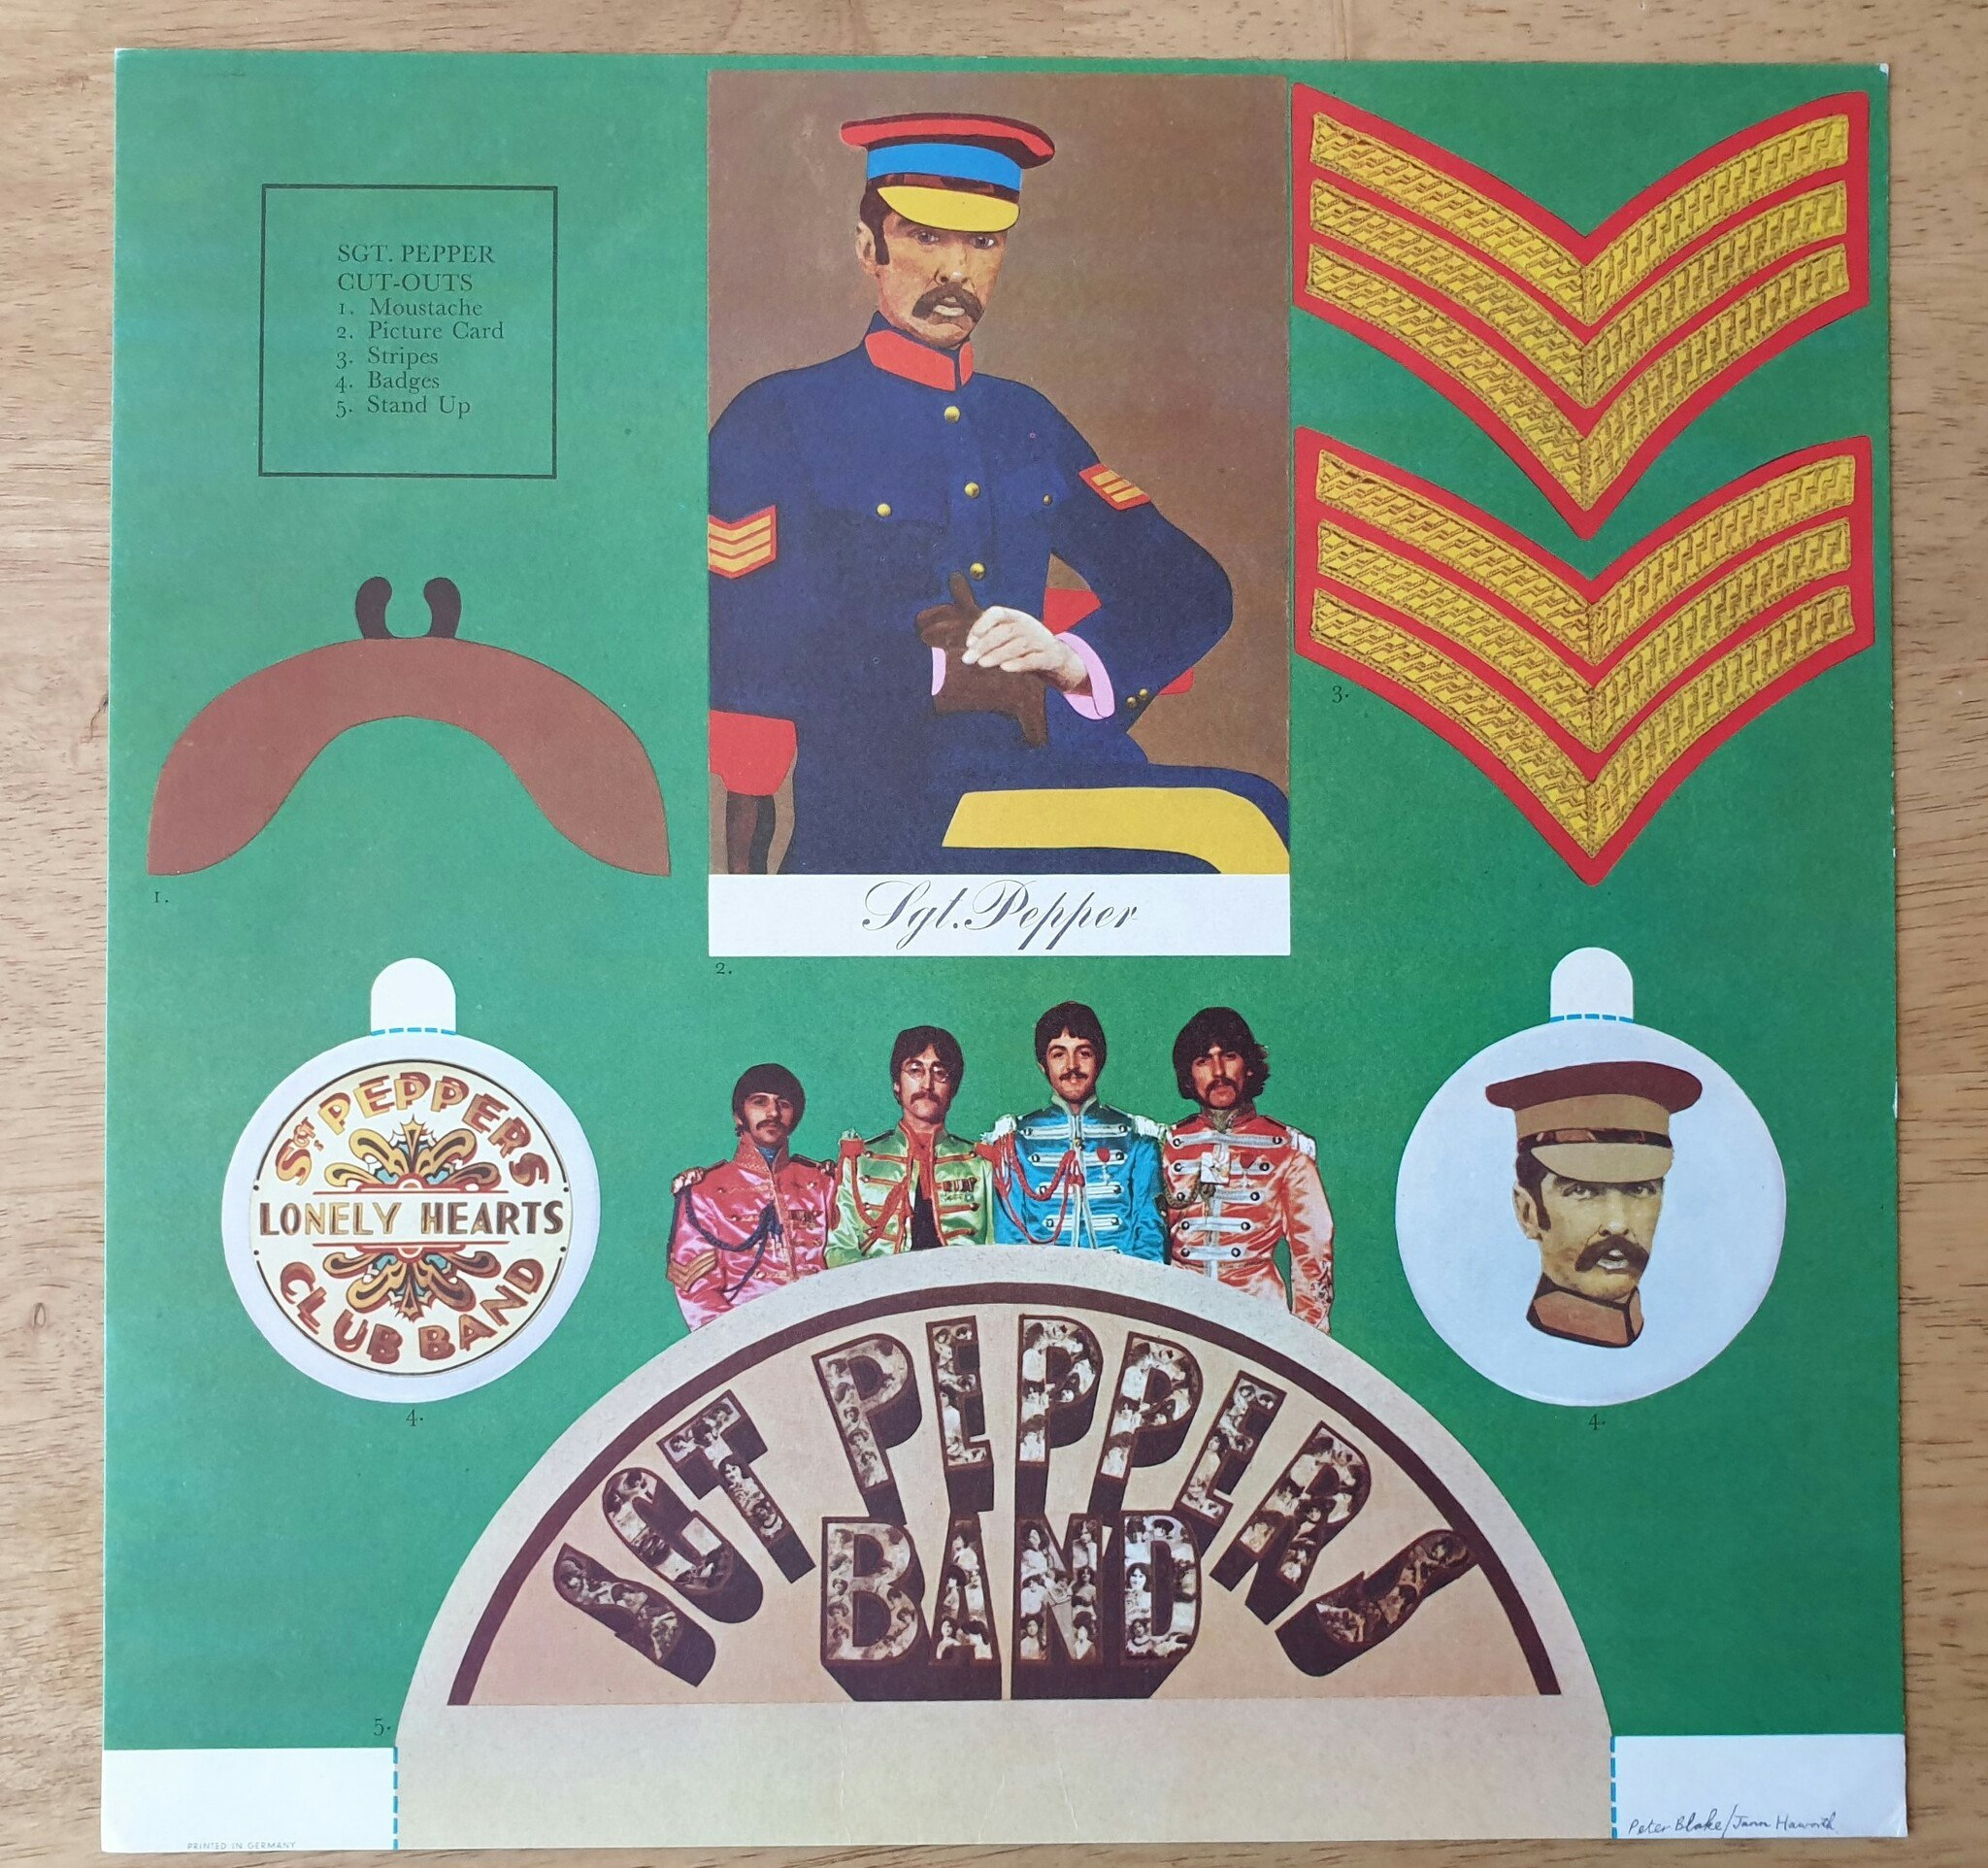 The Beatles, Sgt Peppers Lonely hearts club band. Vinyl LP